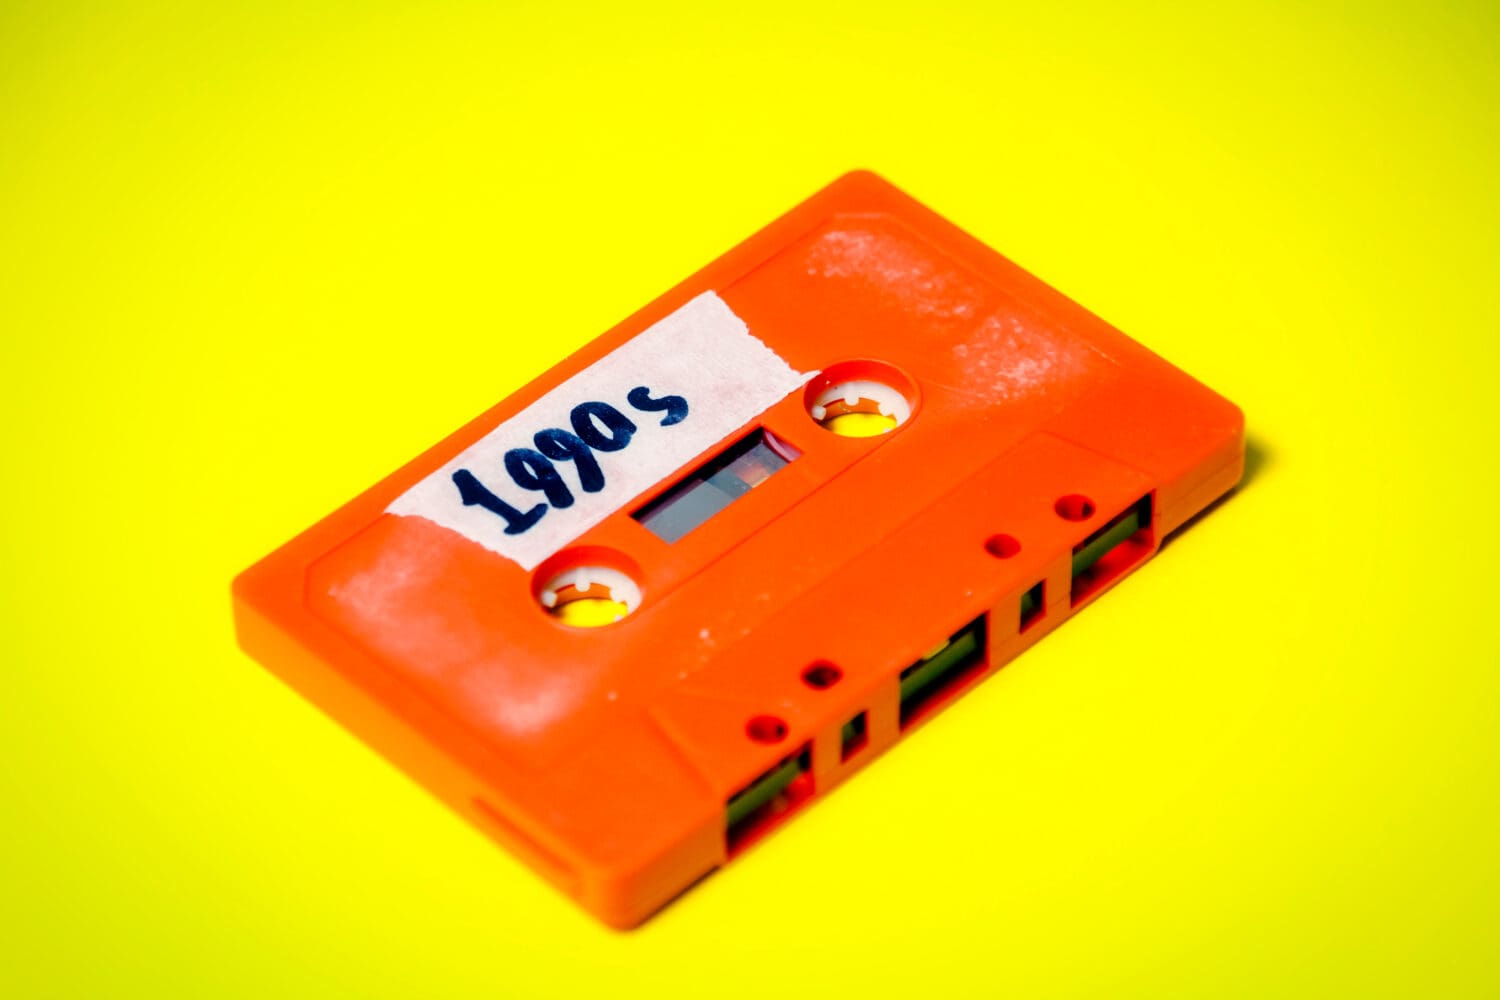 A vintage cassette tape (obsolete music technology), orange on a yellow surface, angled shot, carrying a label with the handwritten text 1990s.